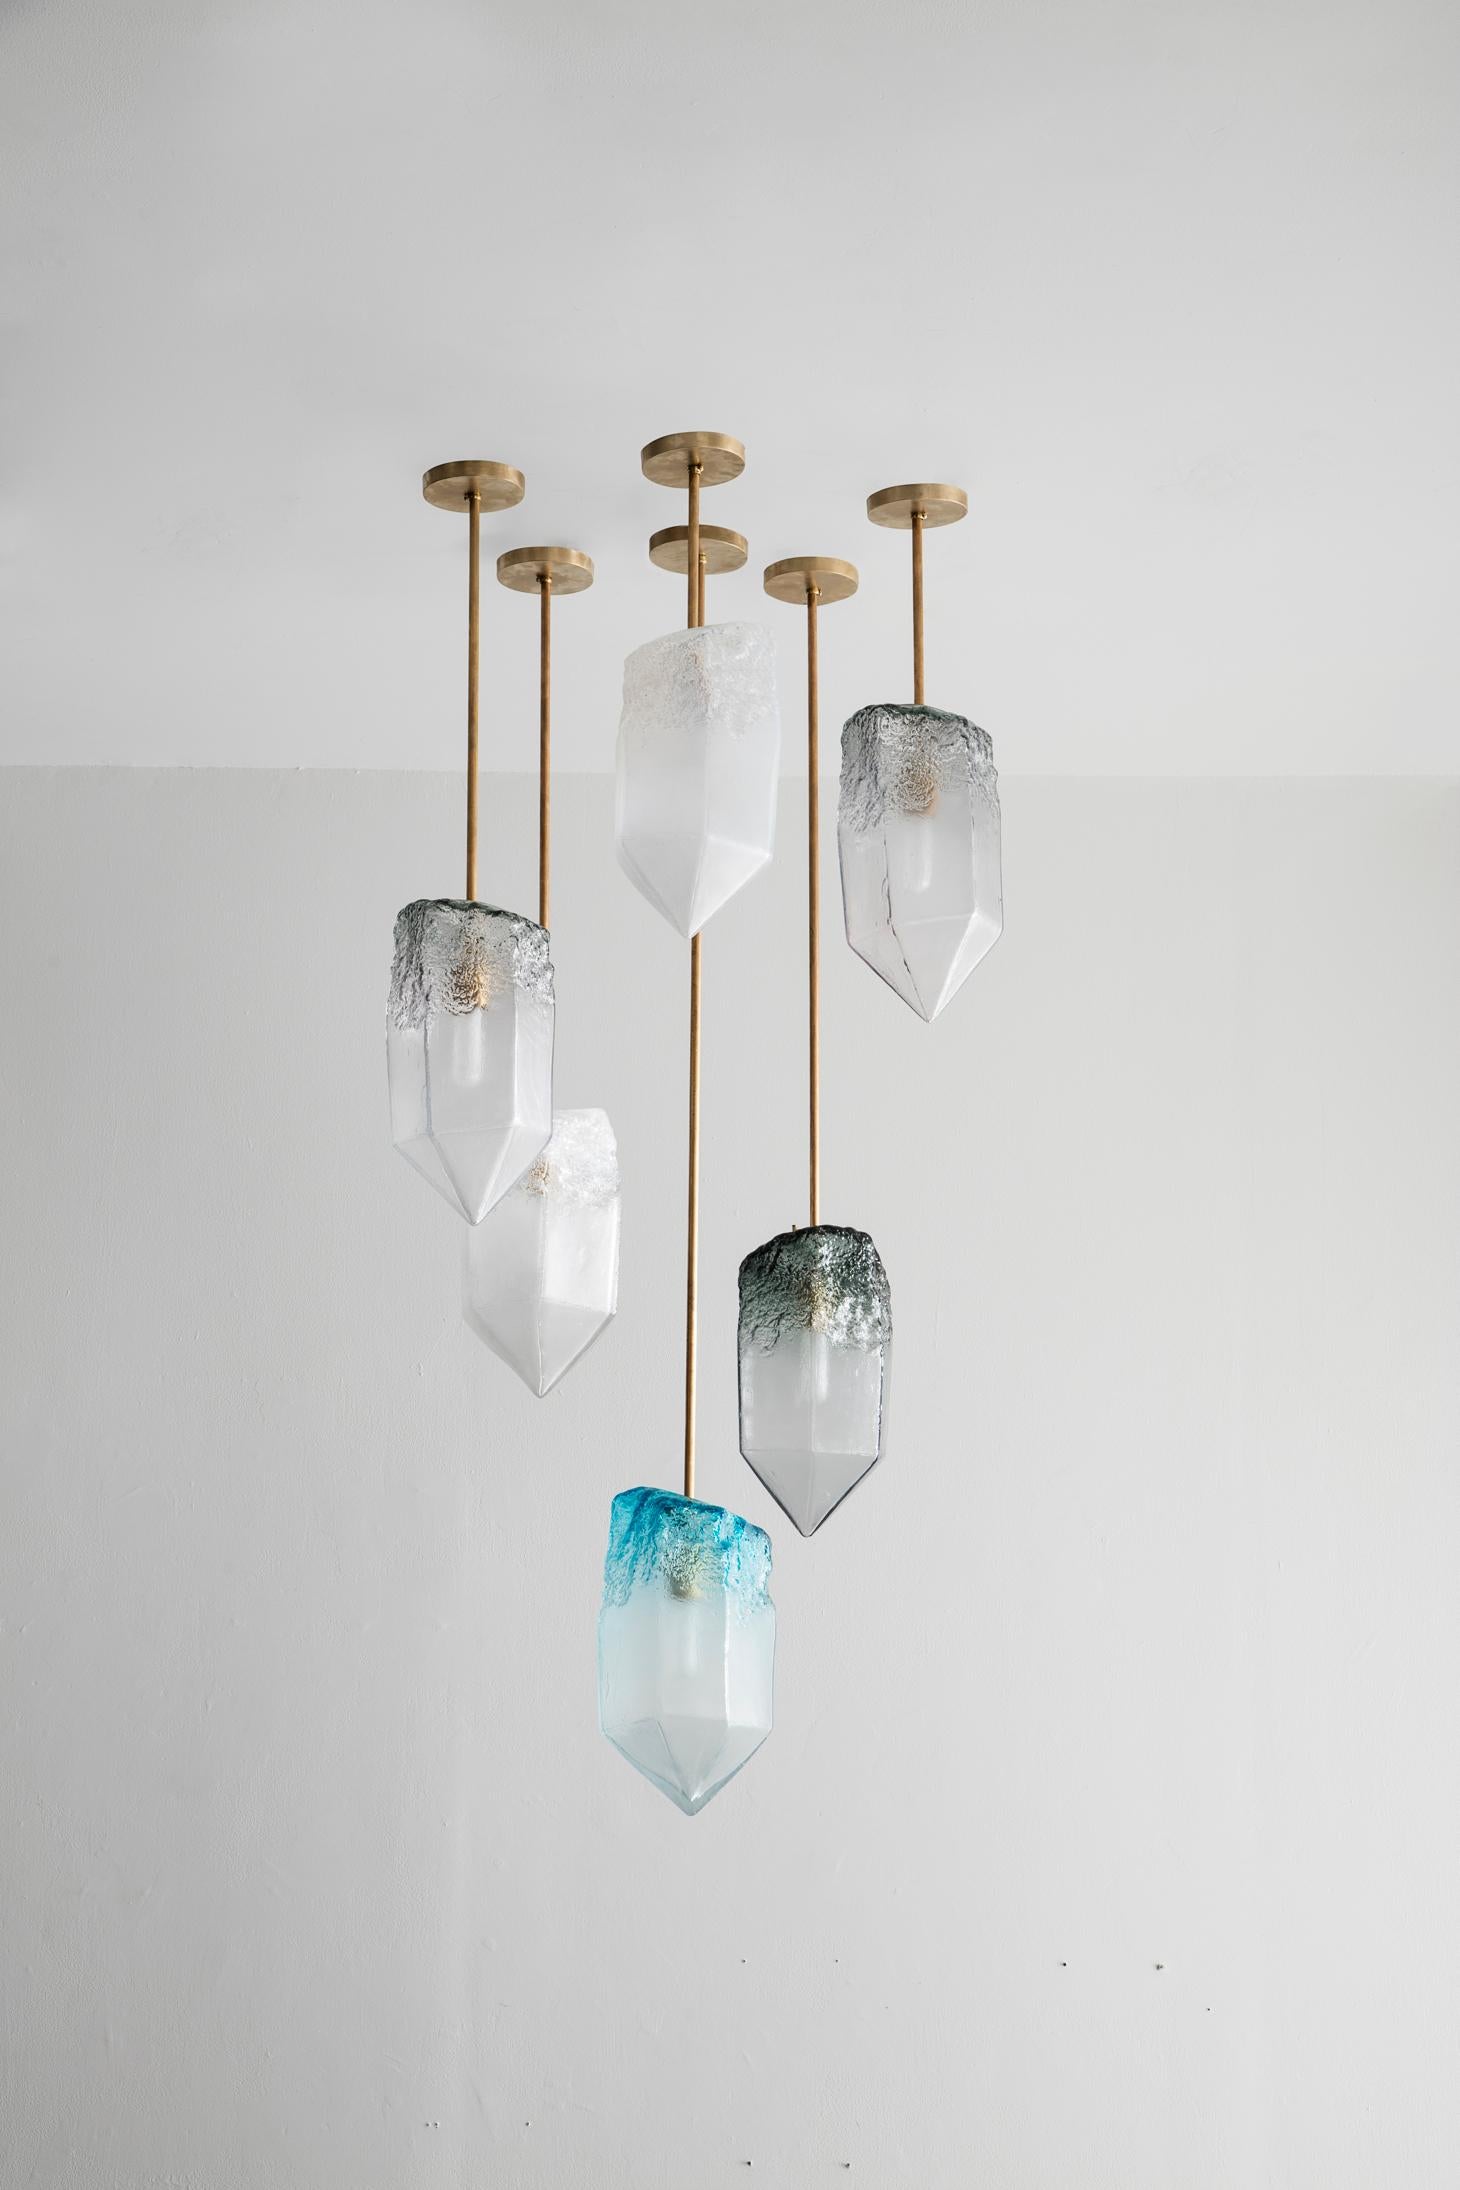 American Sculptural Pendant Light in Turquoise Glass by Jeff Zimmerman, 2016